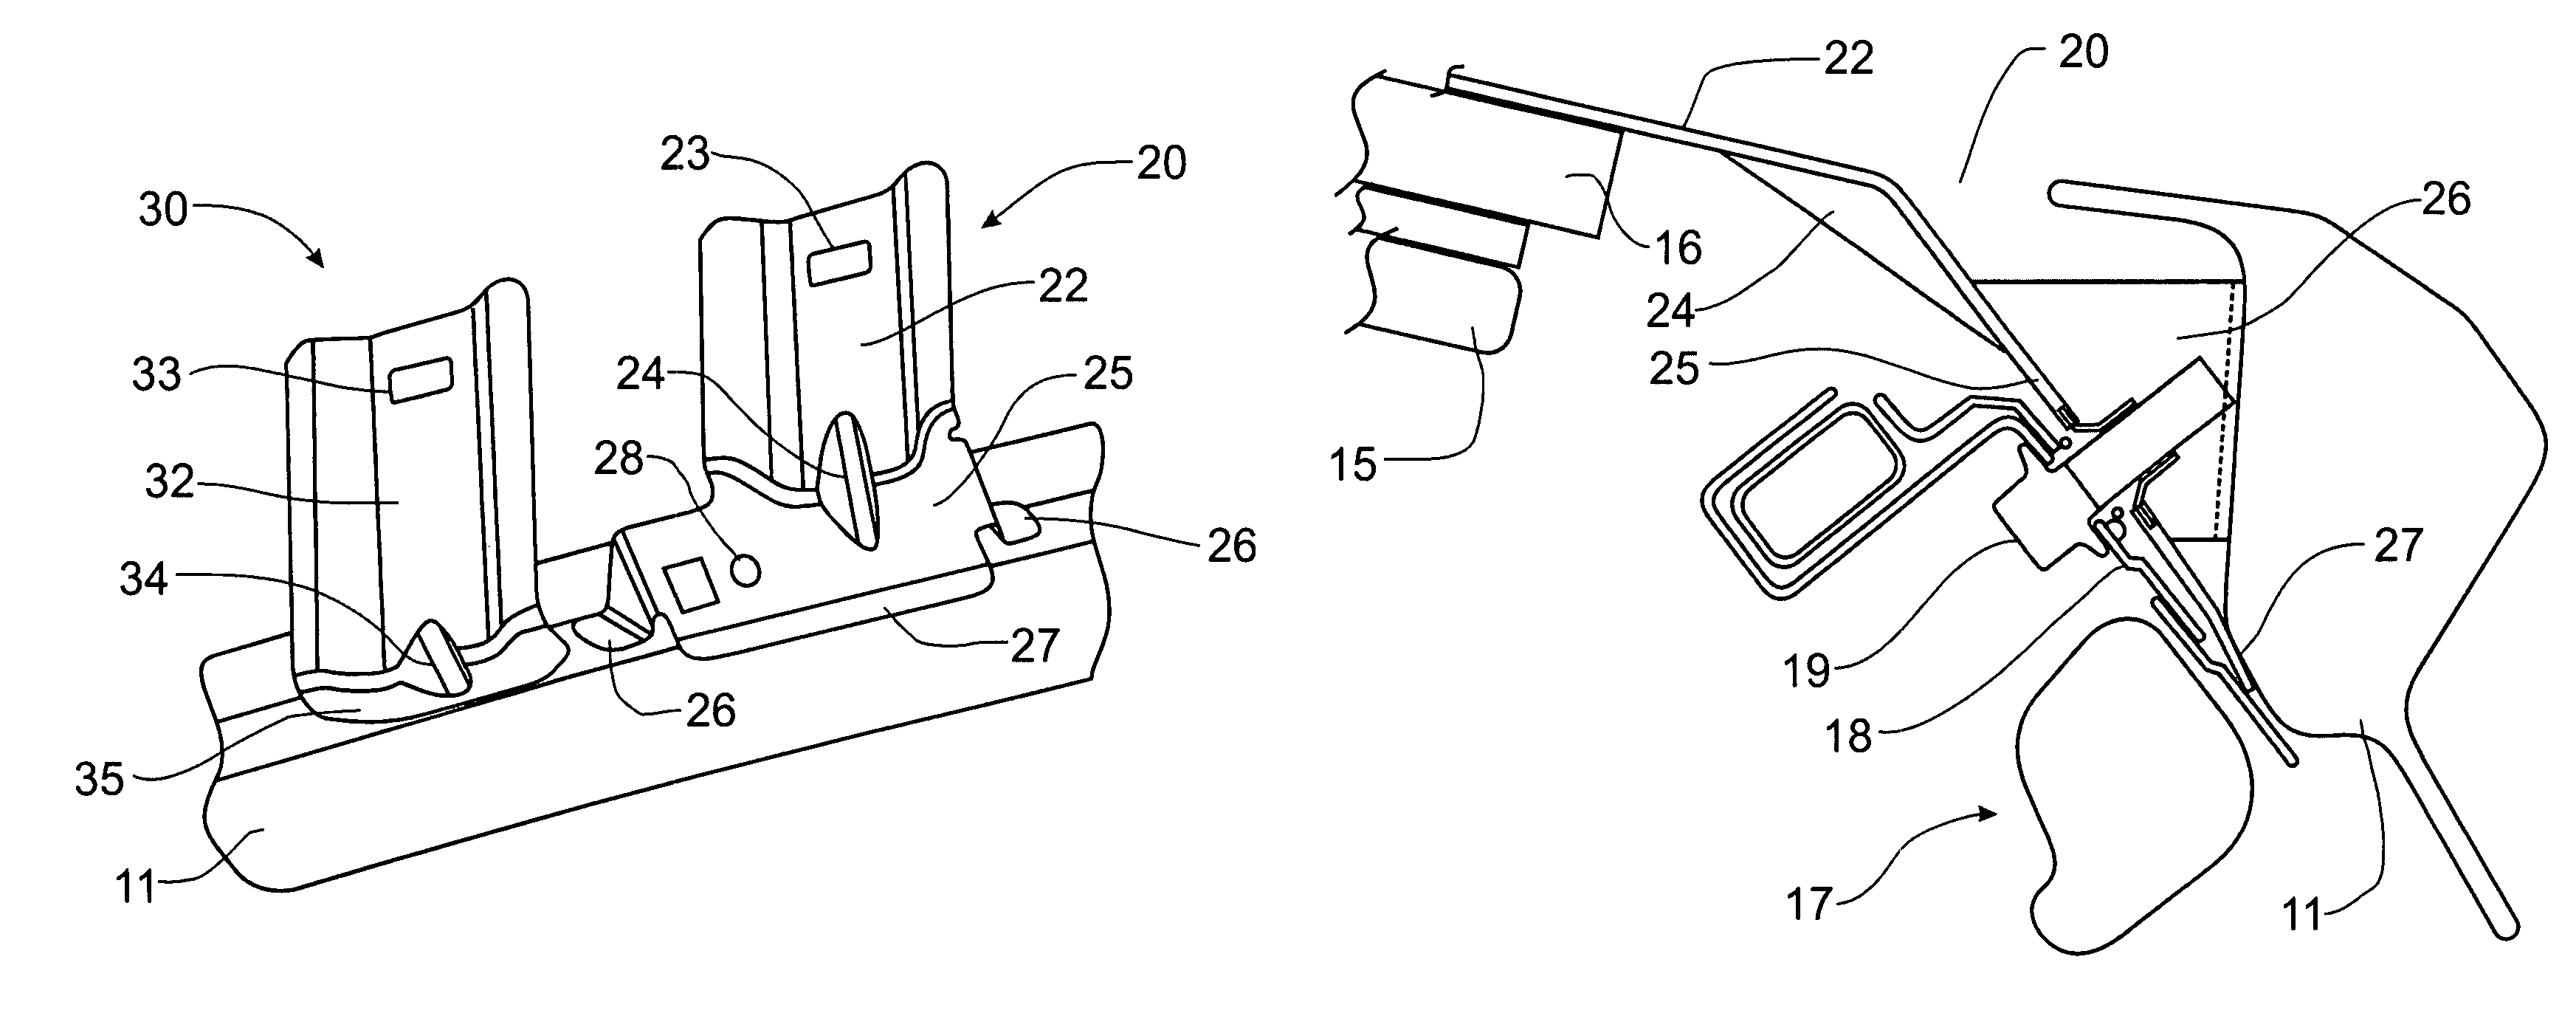 Combination grab handle and airbag bracket